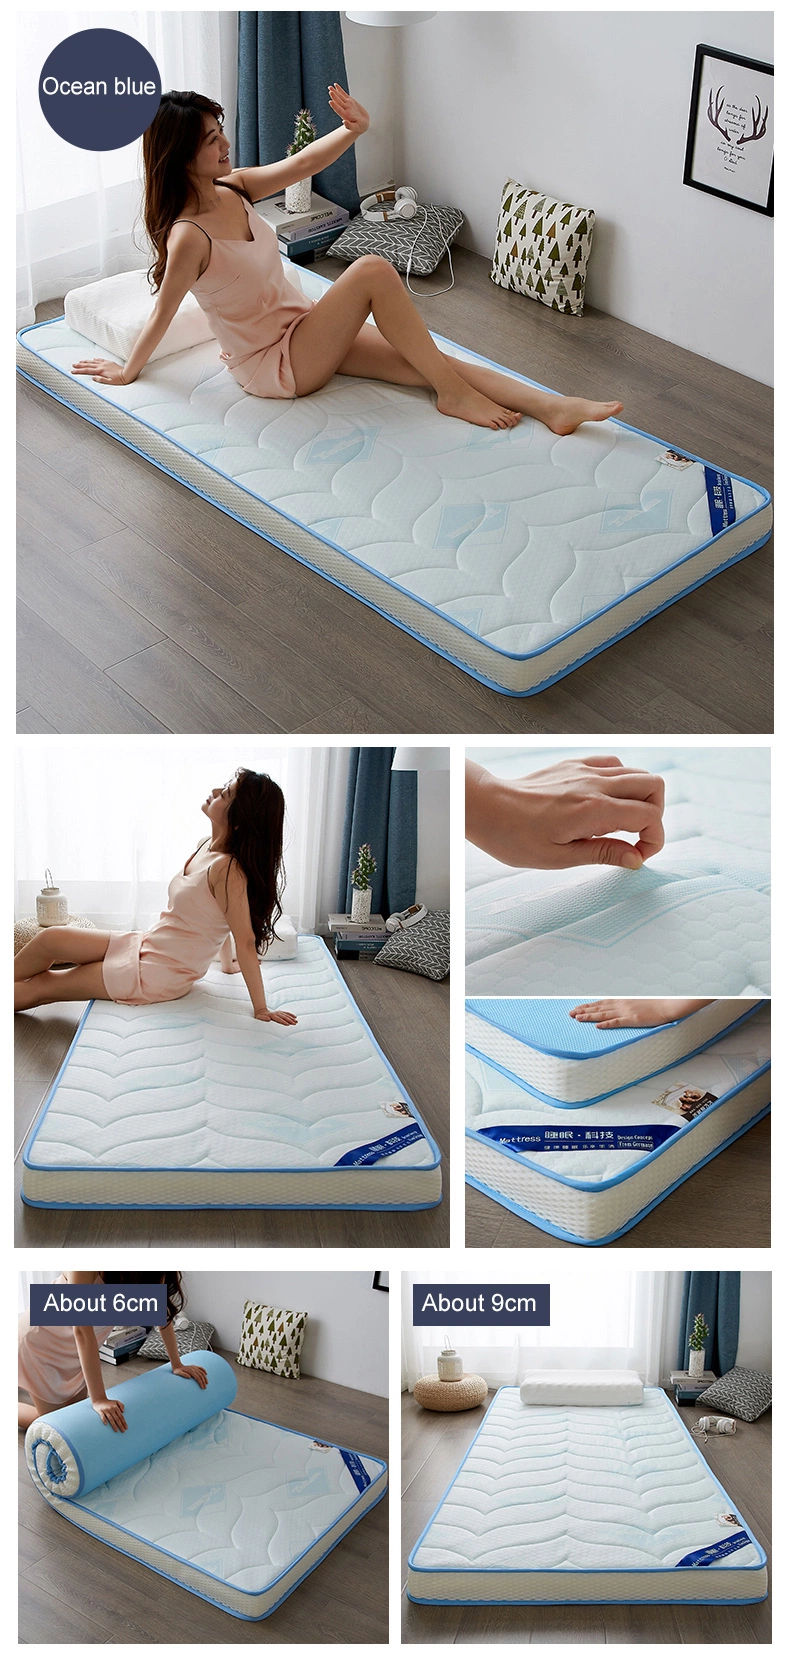 Army Bed Mattress Thick 6cm Portable Skin Friendly Latex Full